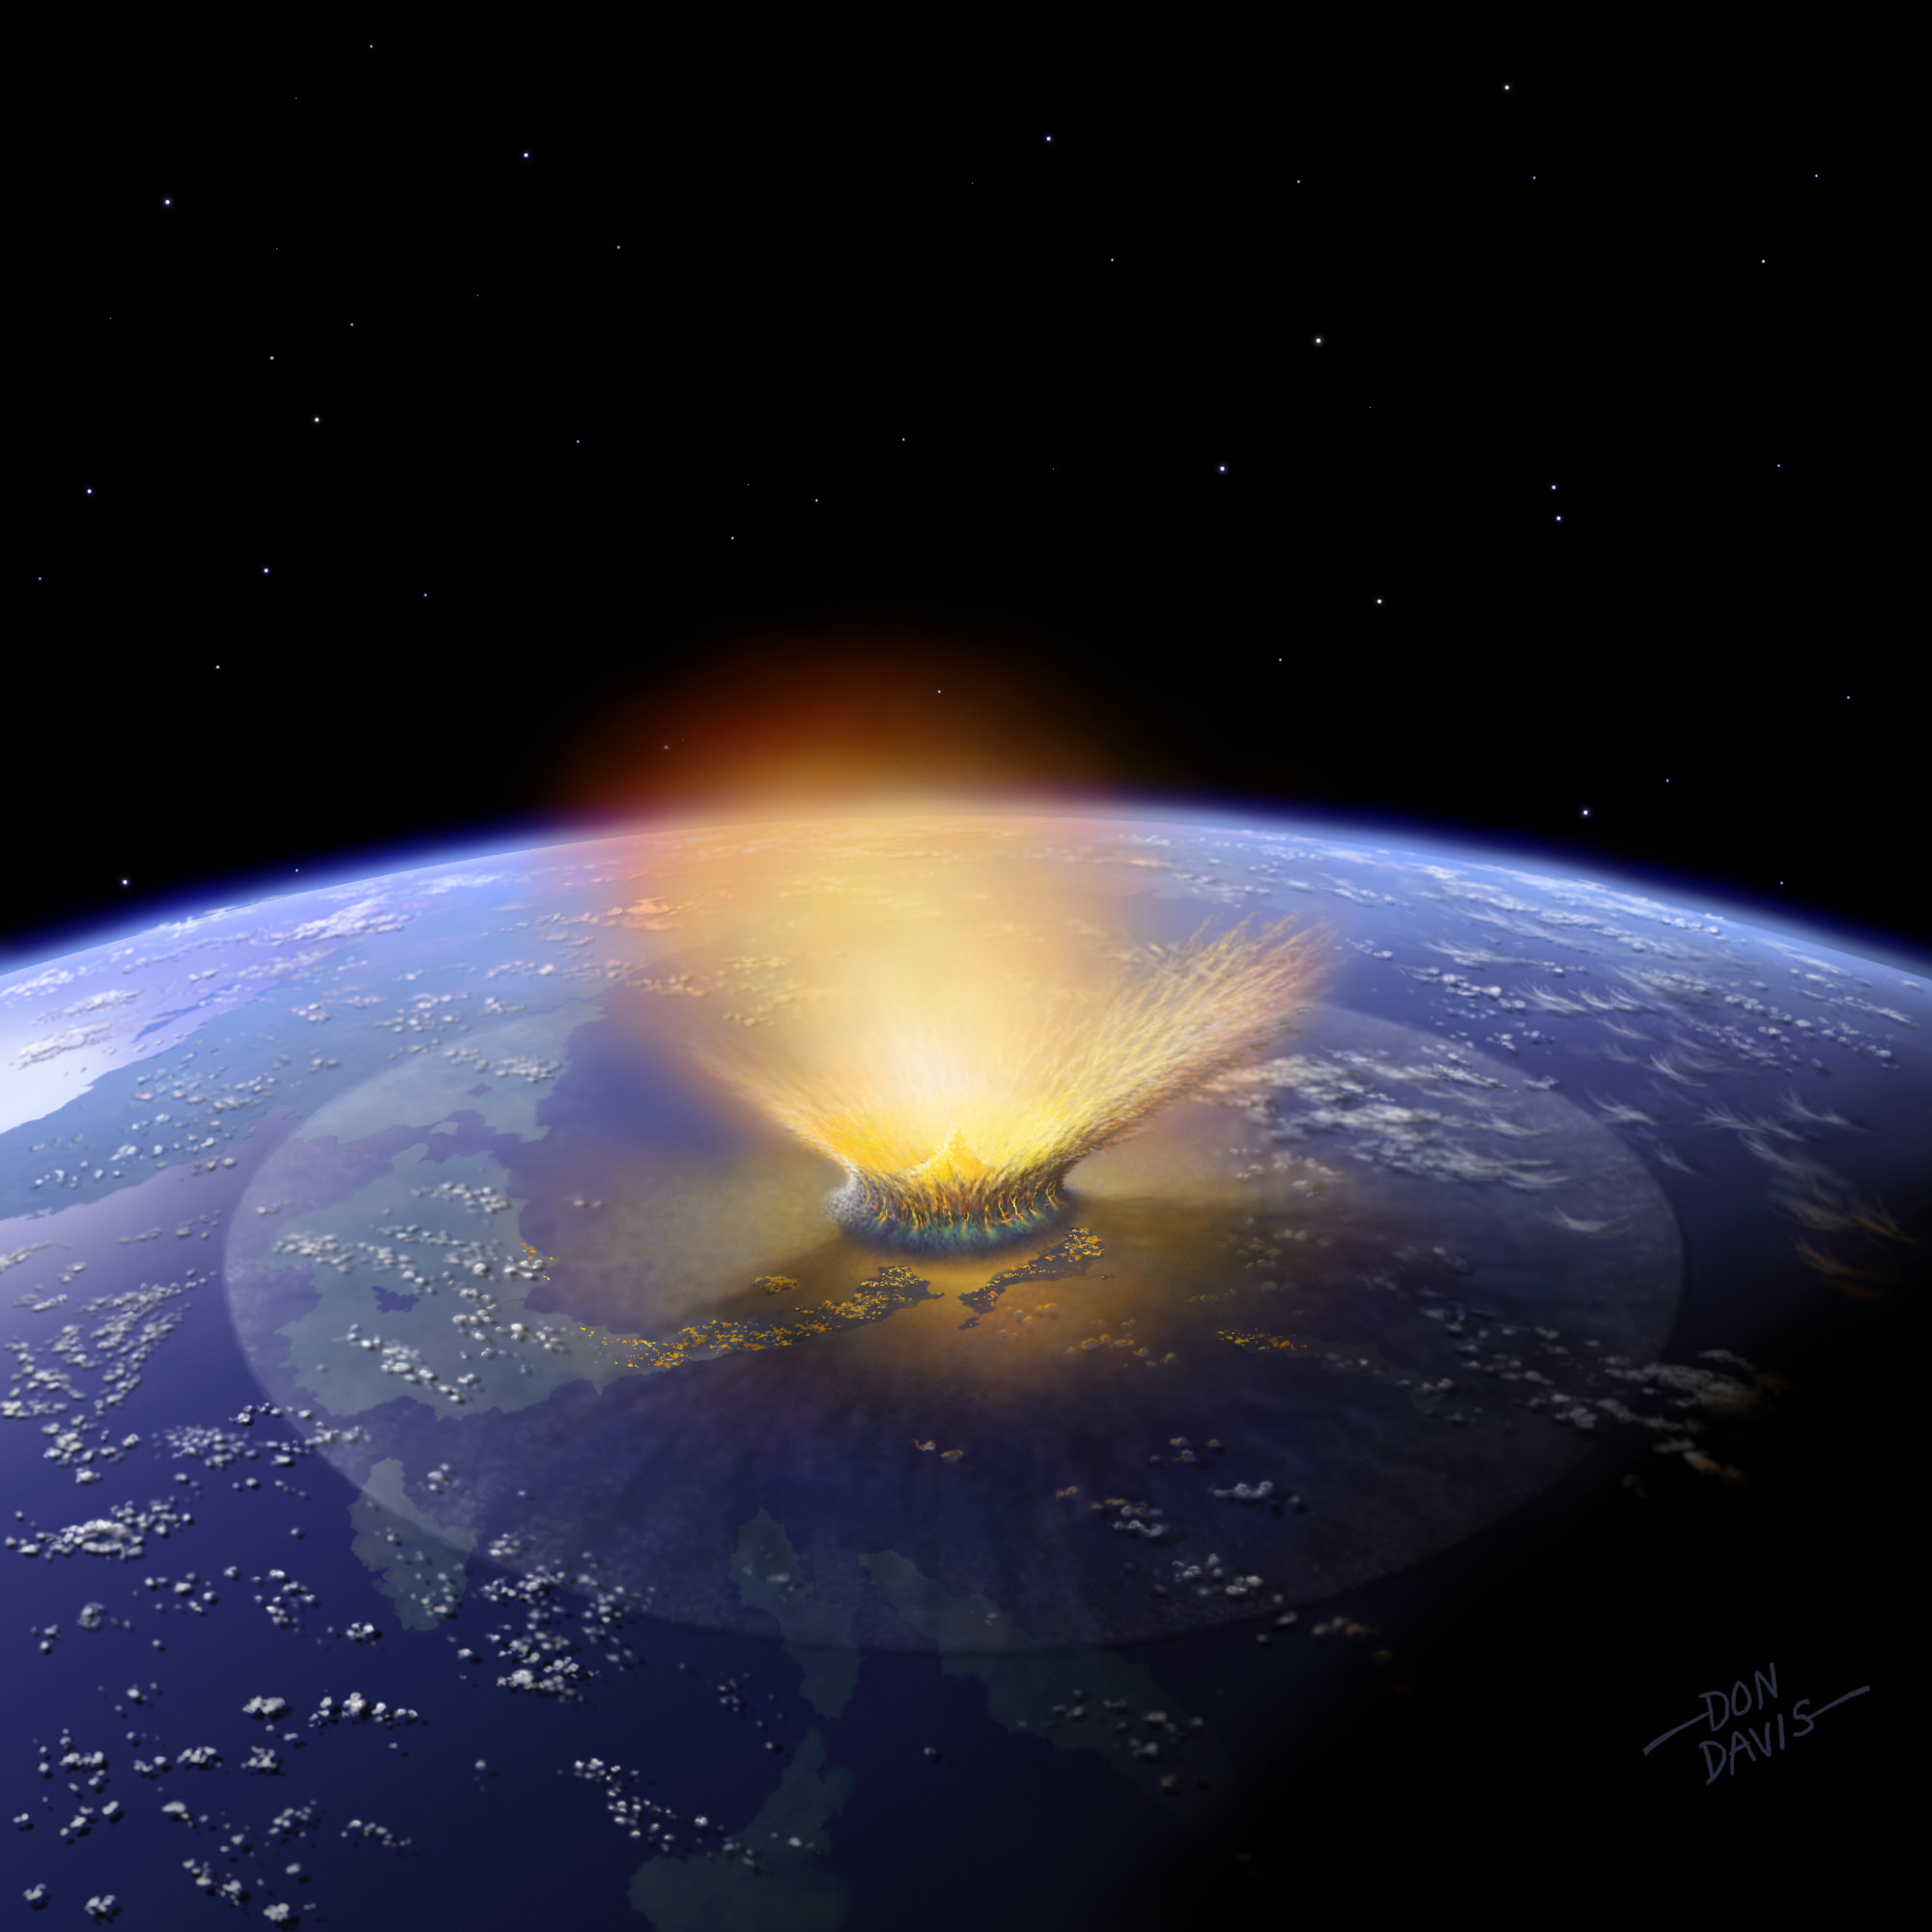 last asteroid to hit earth